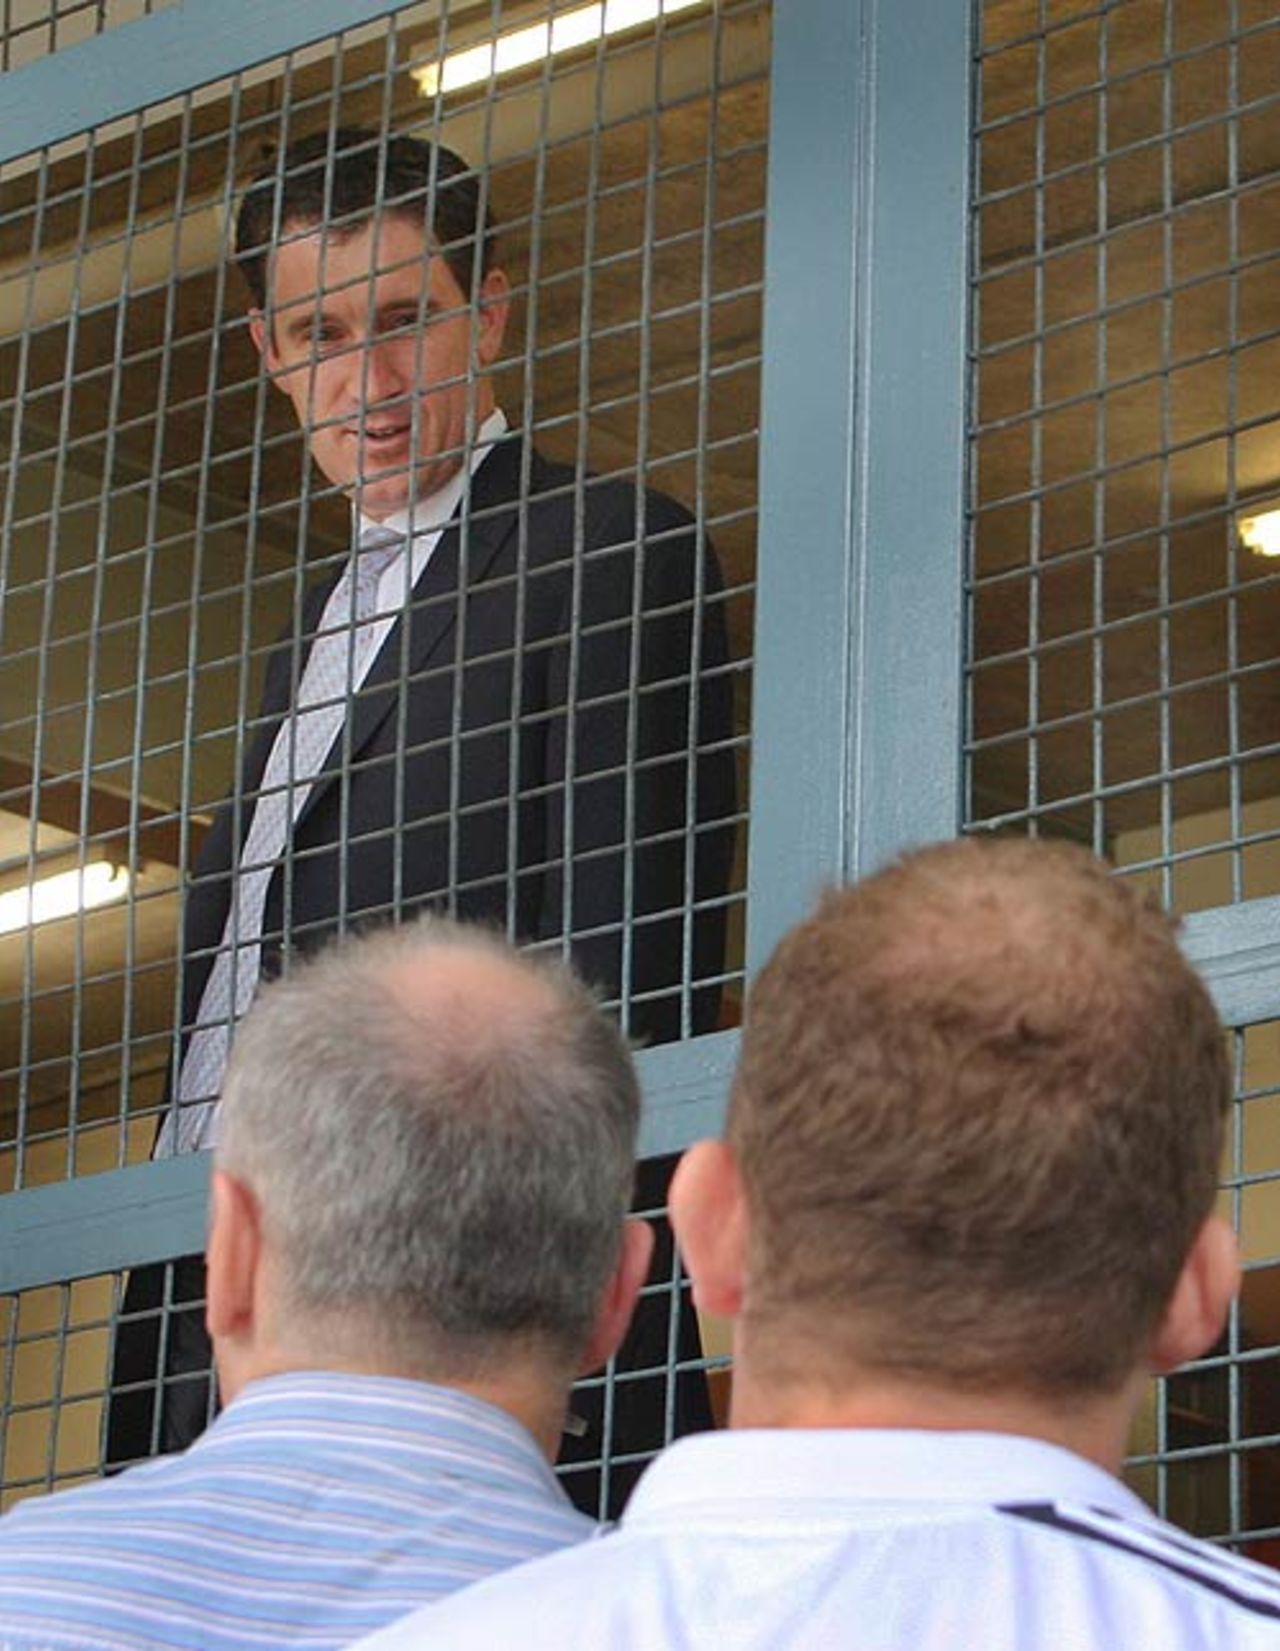 James Sutherland chats to News Ltd journalists who were locked out of the Gabba due to a dispute with Cricket Australia, Australia v Sri Lanka, 1st Test, Brisbane, 1st day, November 8, 2007